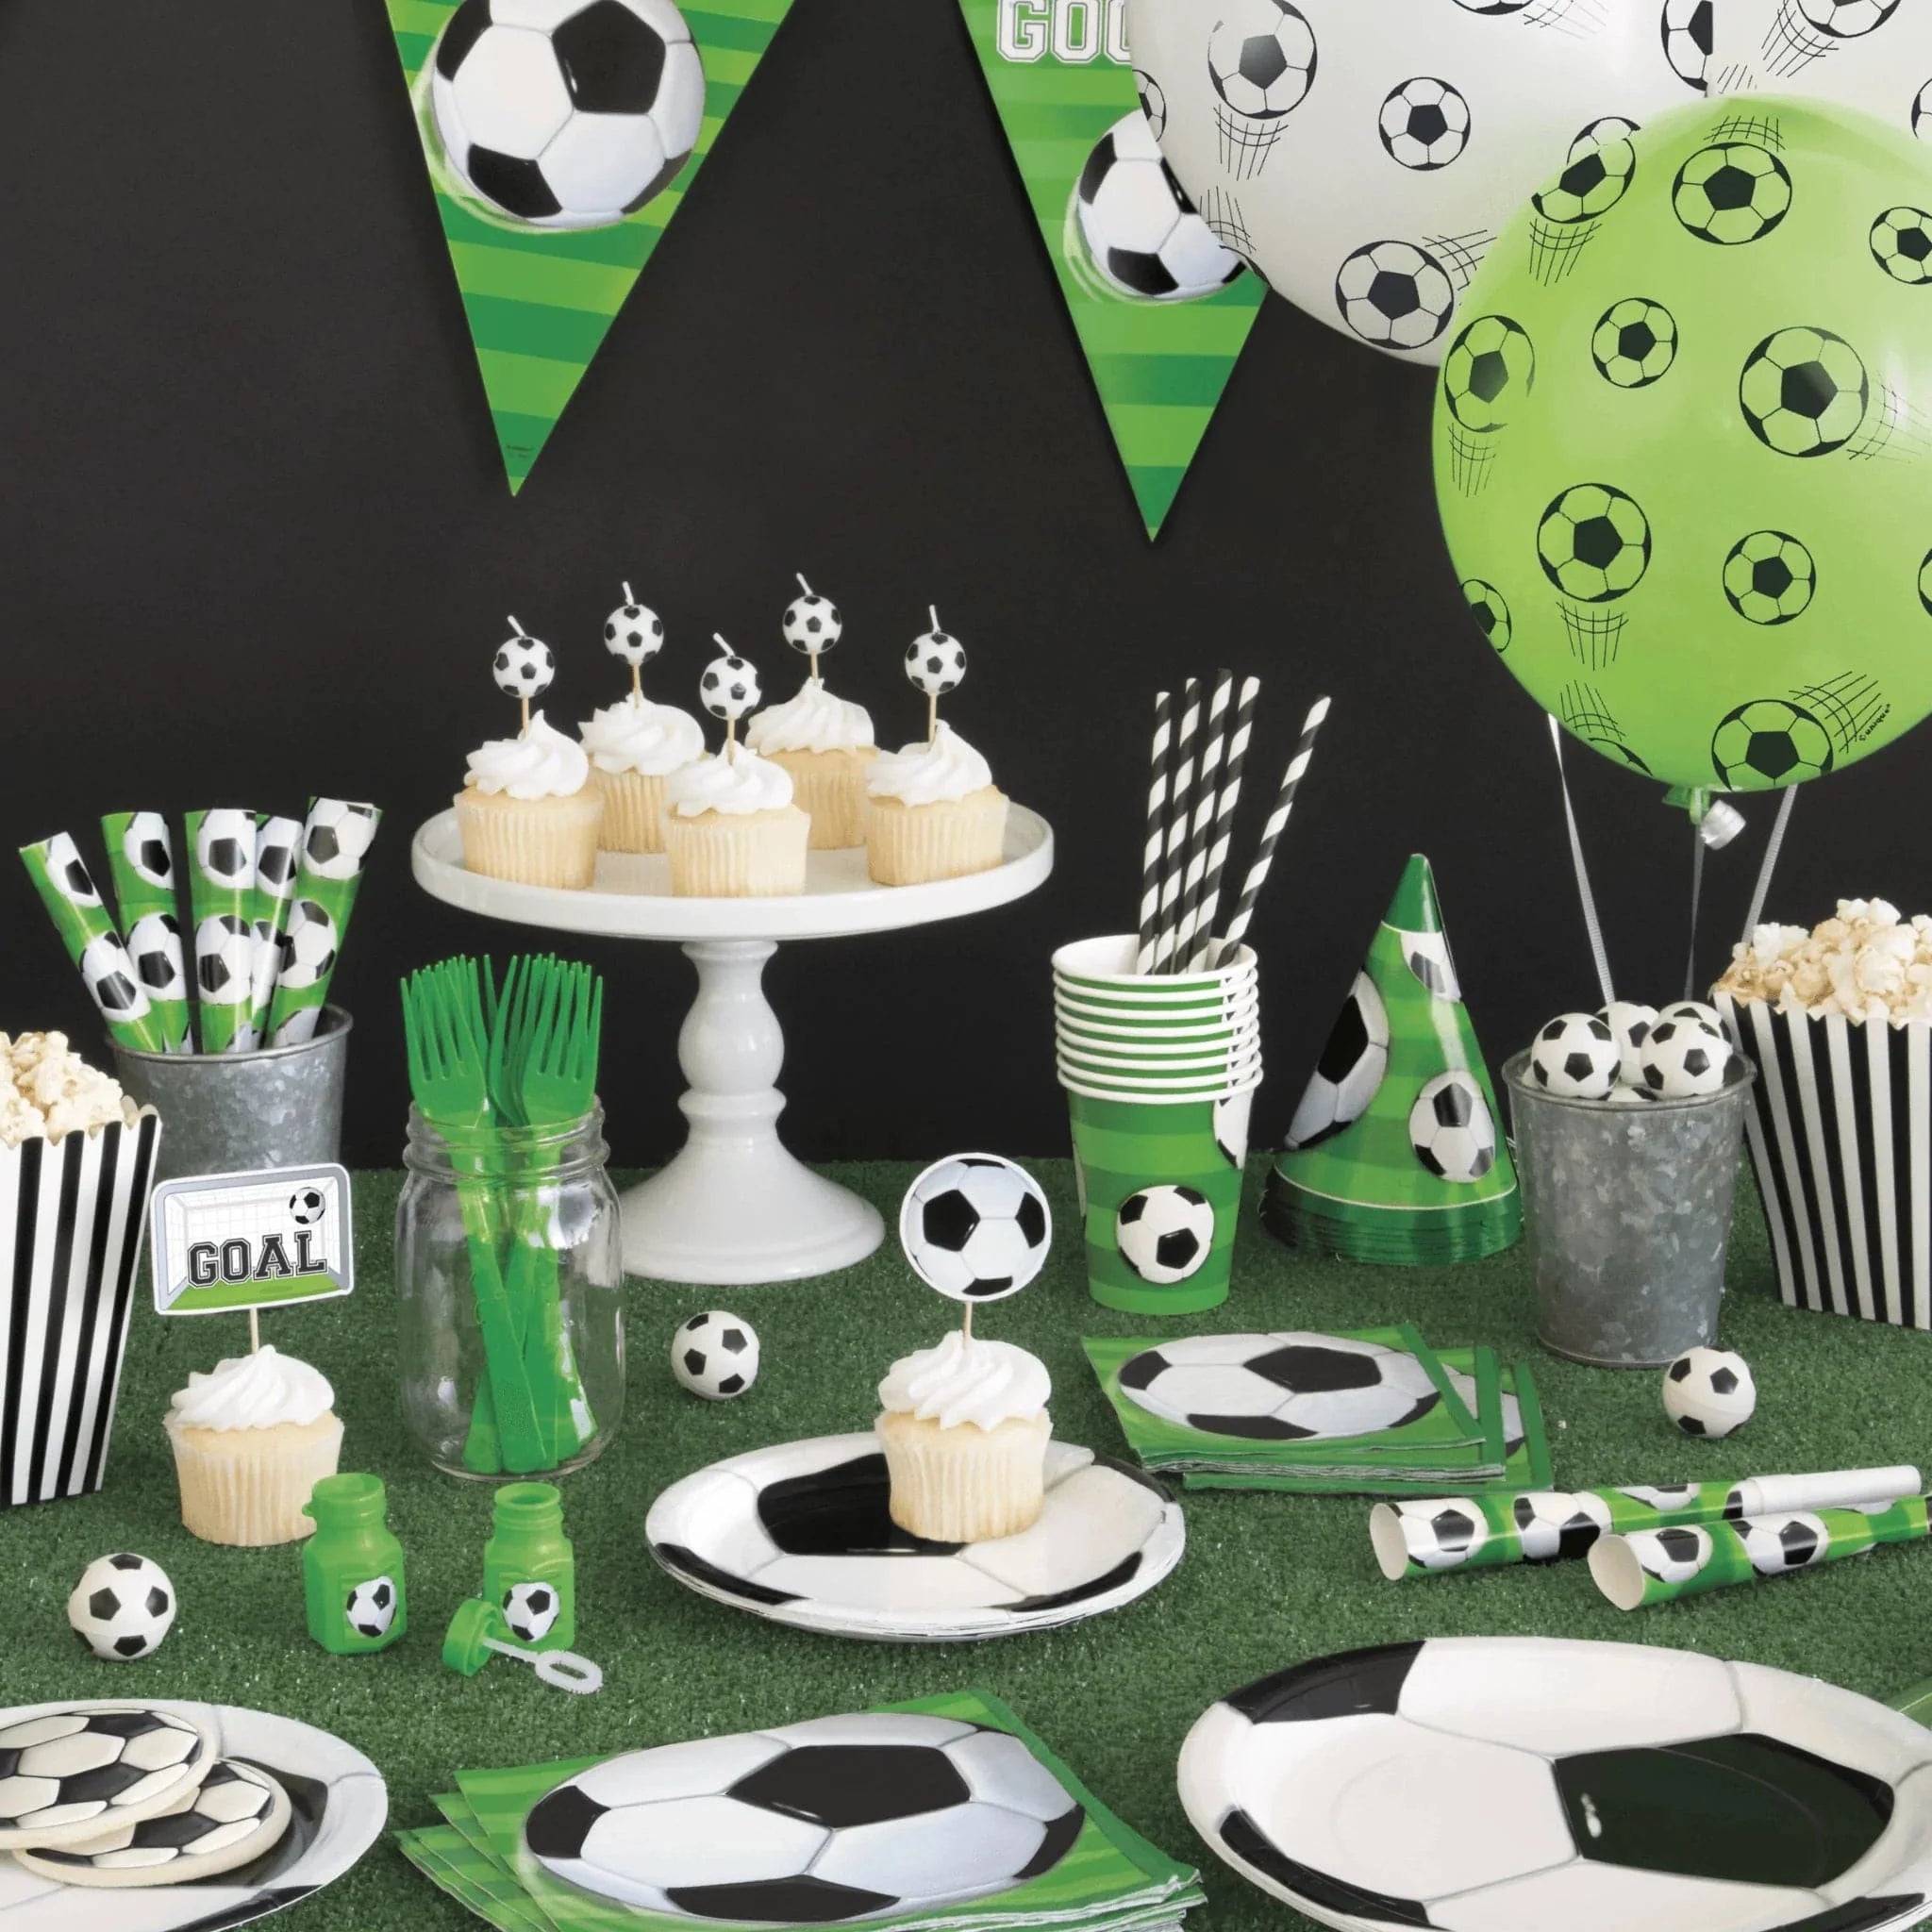 Football Birthday Candles 6pk - Kids Party Craft